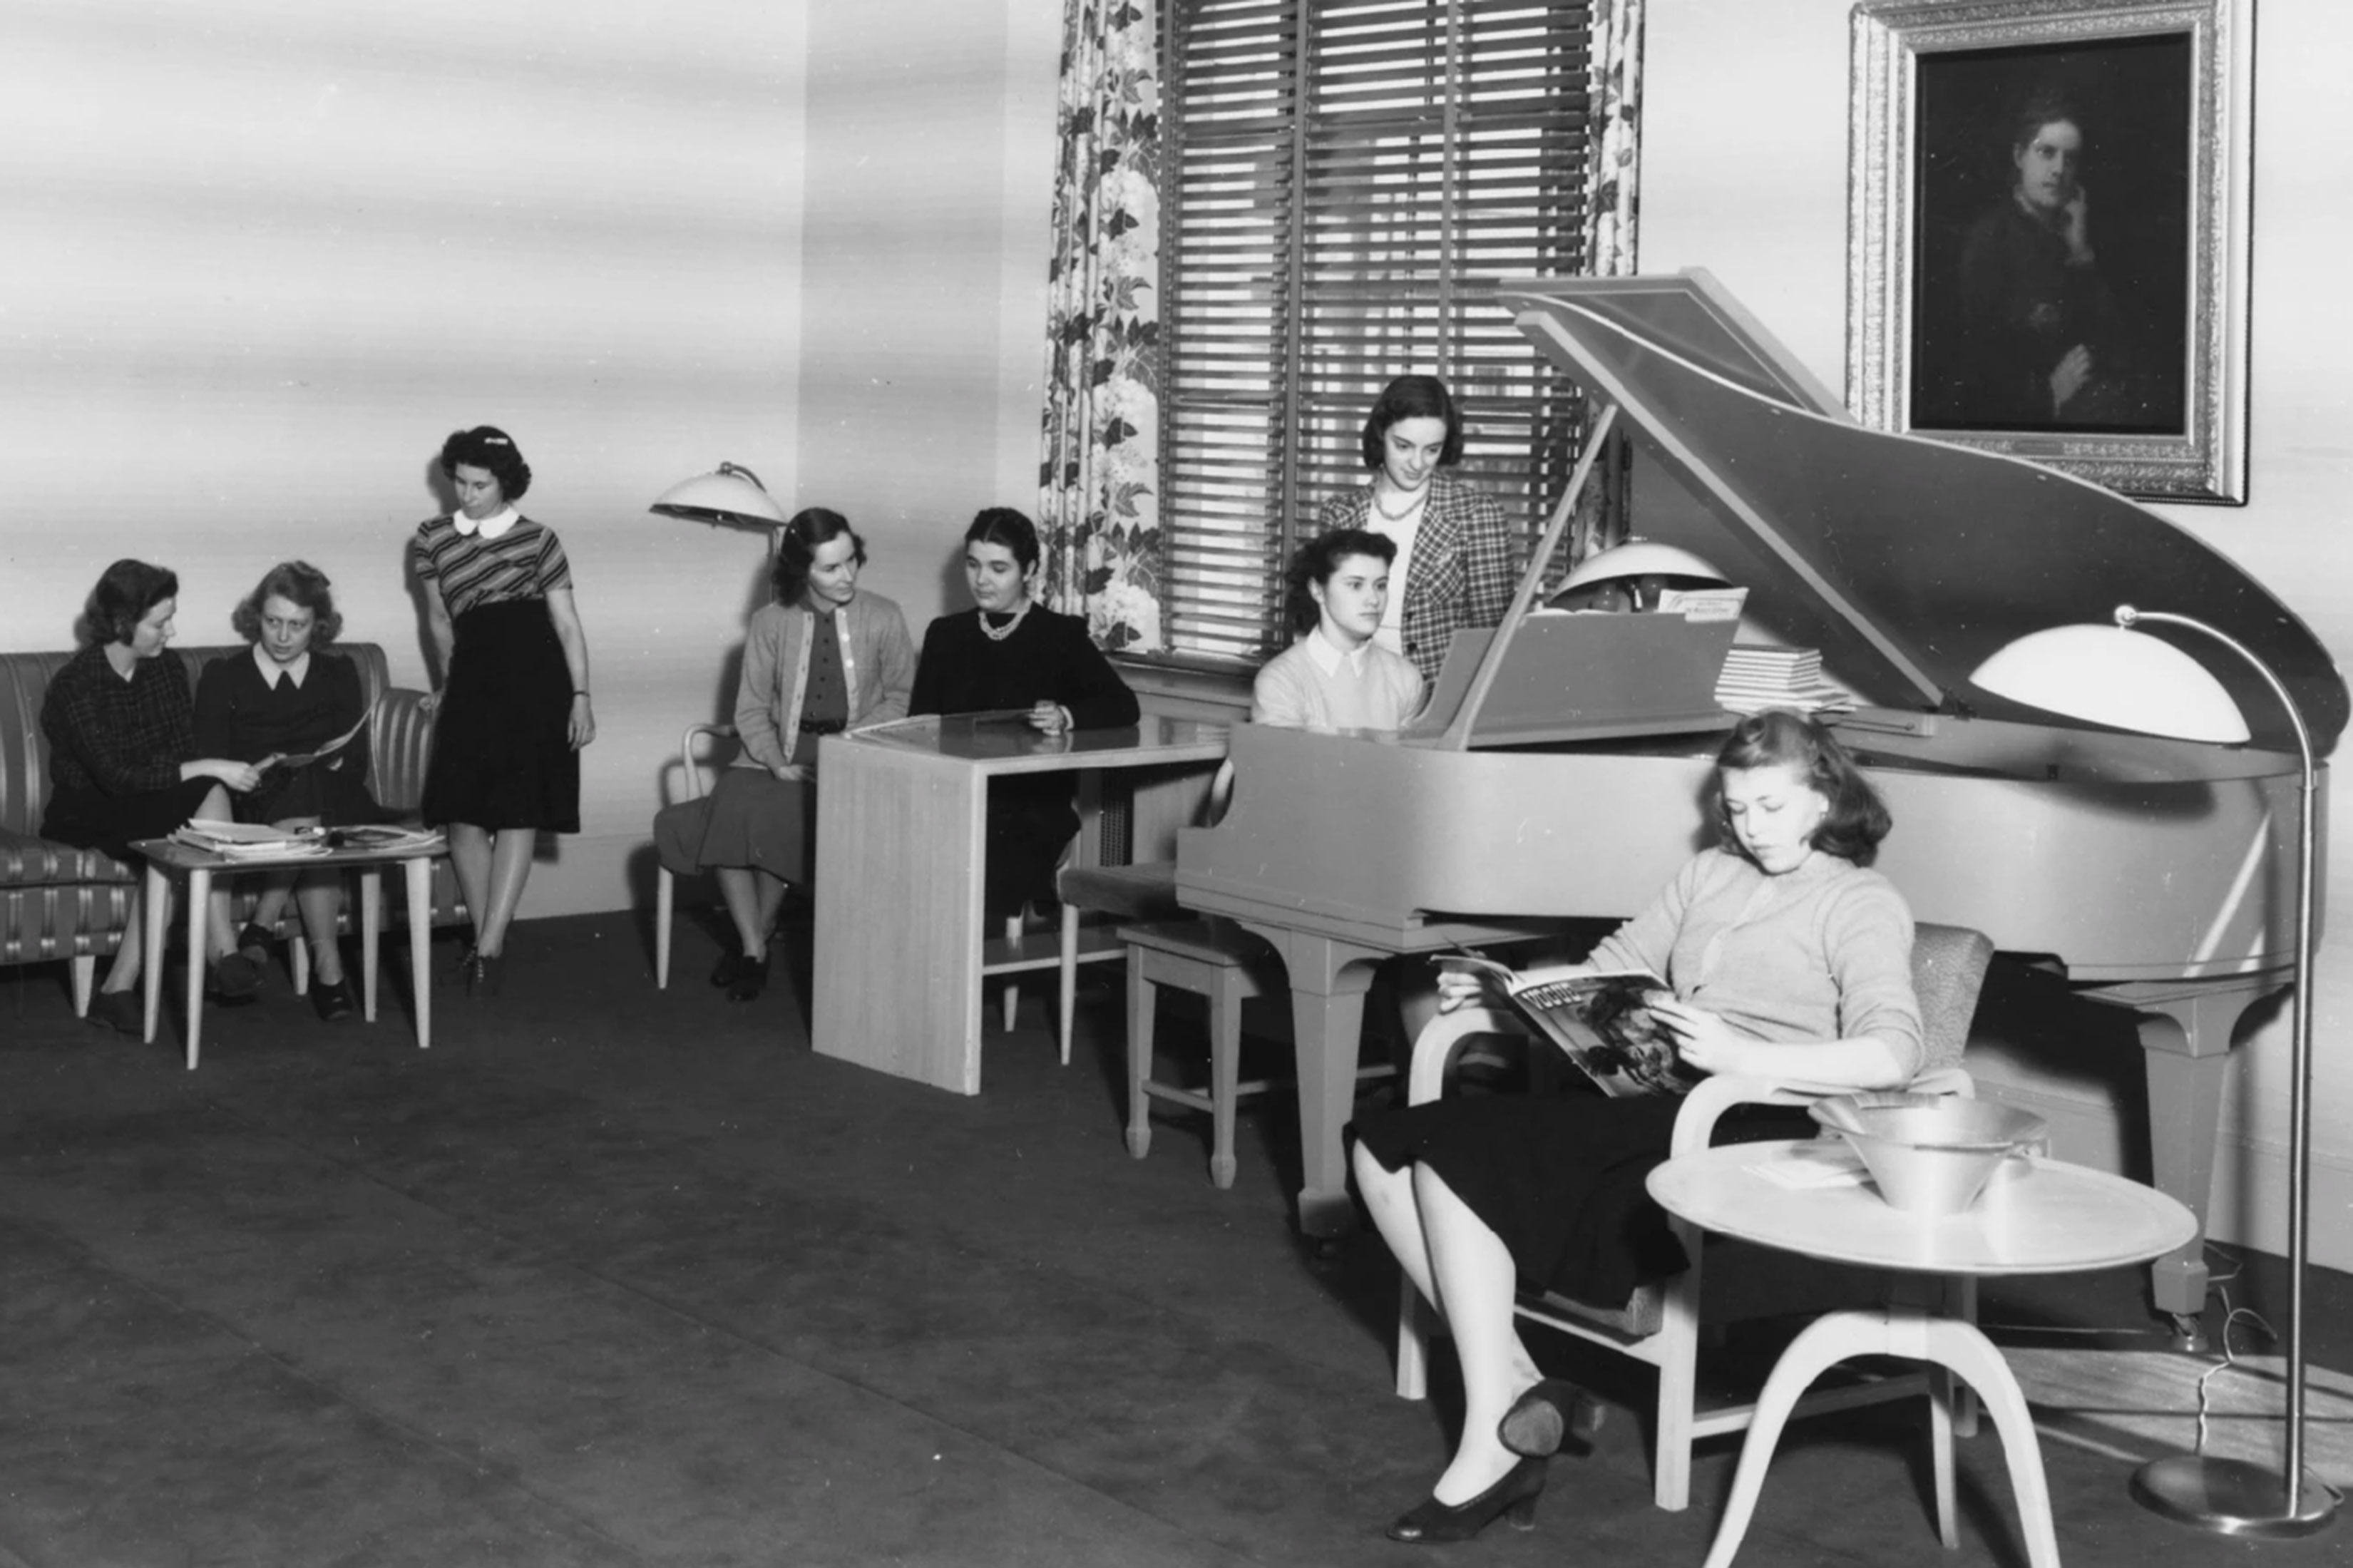 Black and white image from 1940s of women relaxing in a room with a piano